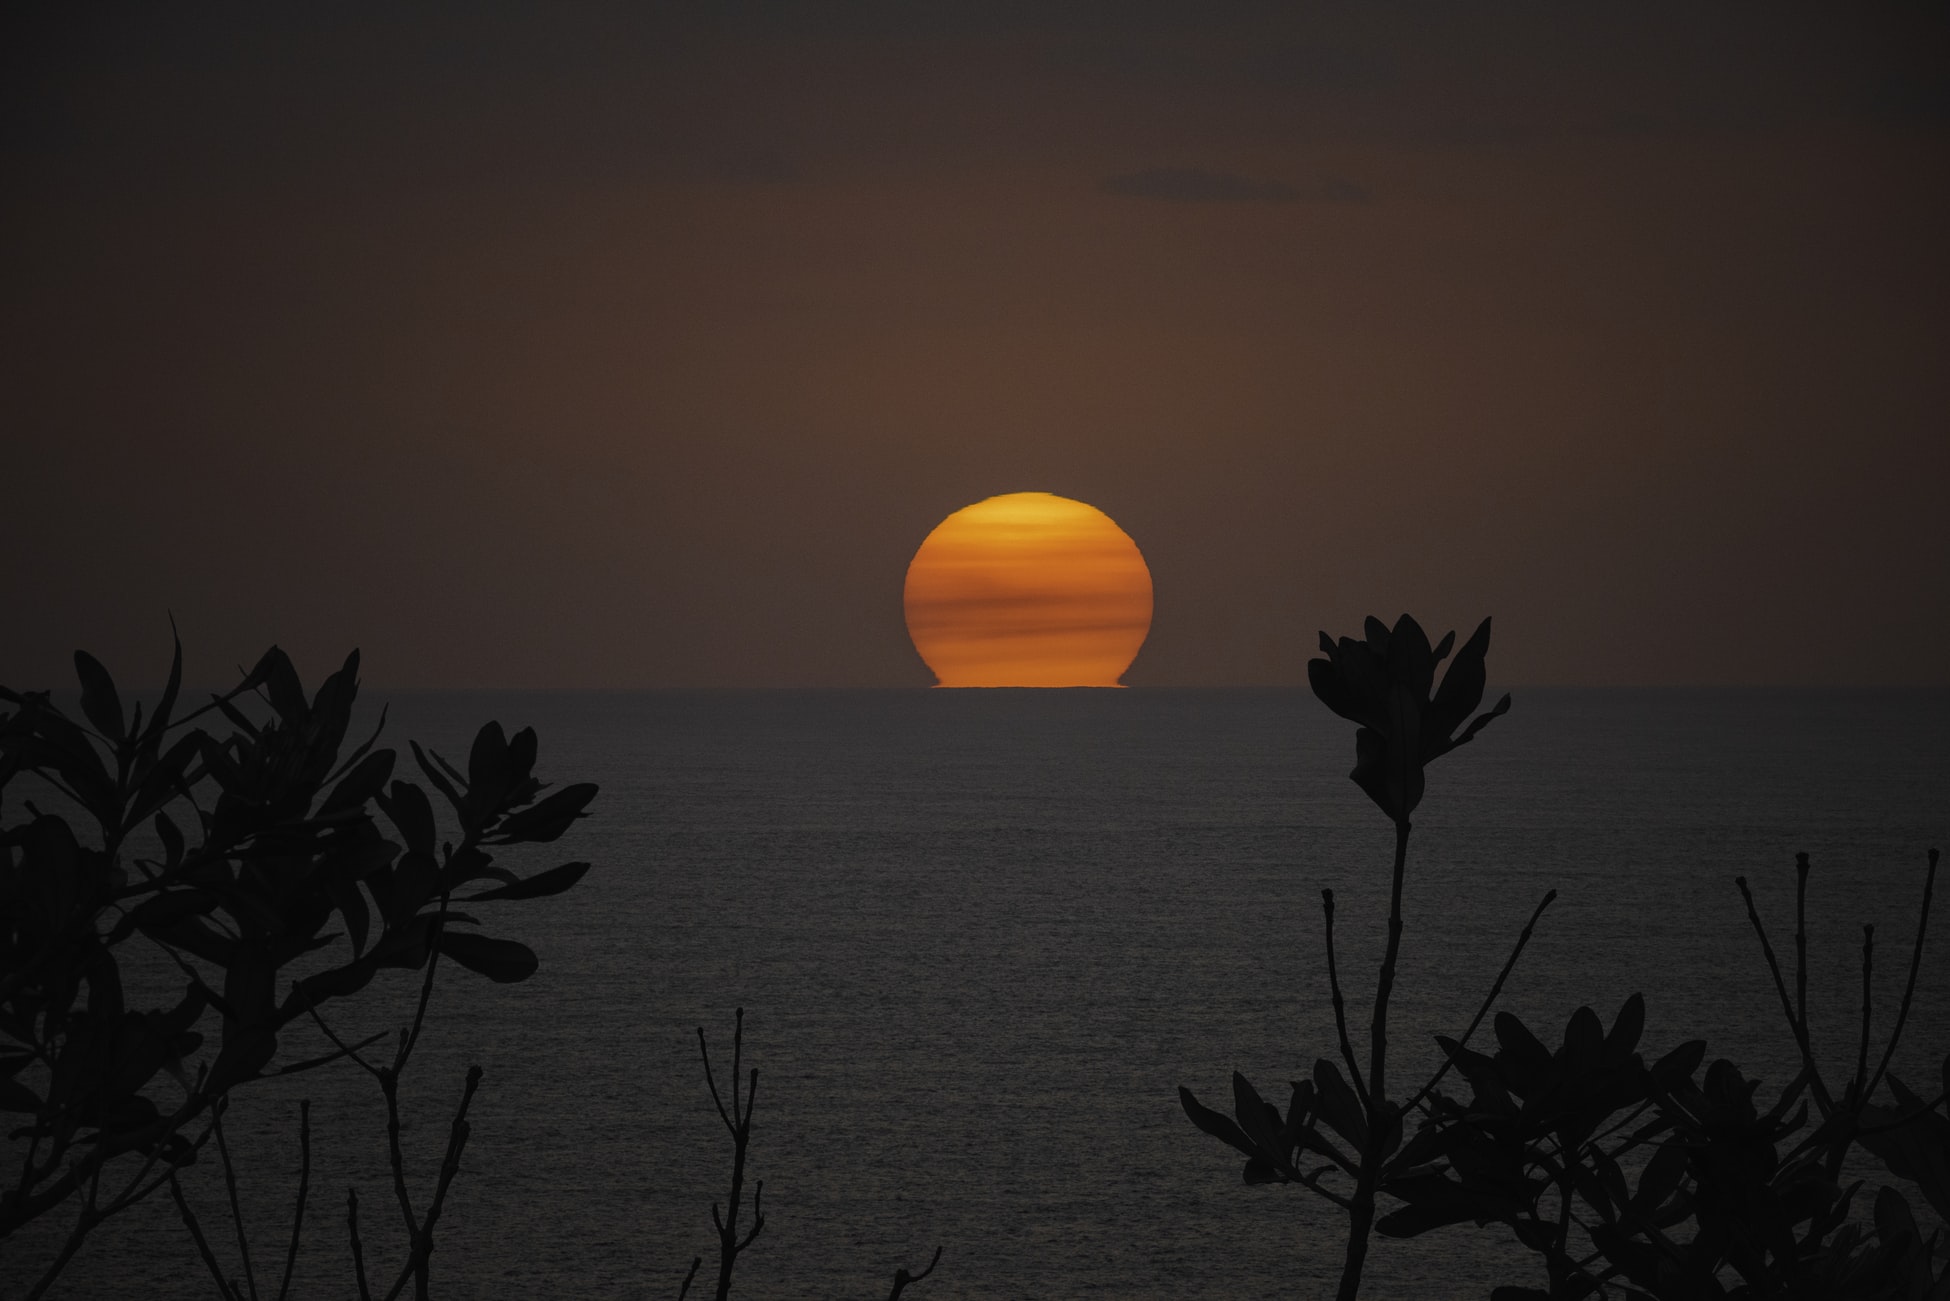 Thick smoke from the East Coast bushfires in Australia have enabled photographing the rising sun as though it was the moon. This photo taken in thick heathland bush at trial Bay NSW shows the sun rising out of the ocean coloured by bush/wild fire smoke.